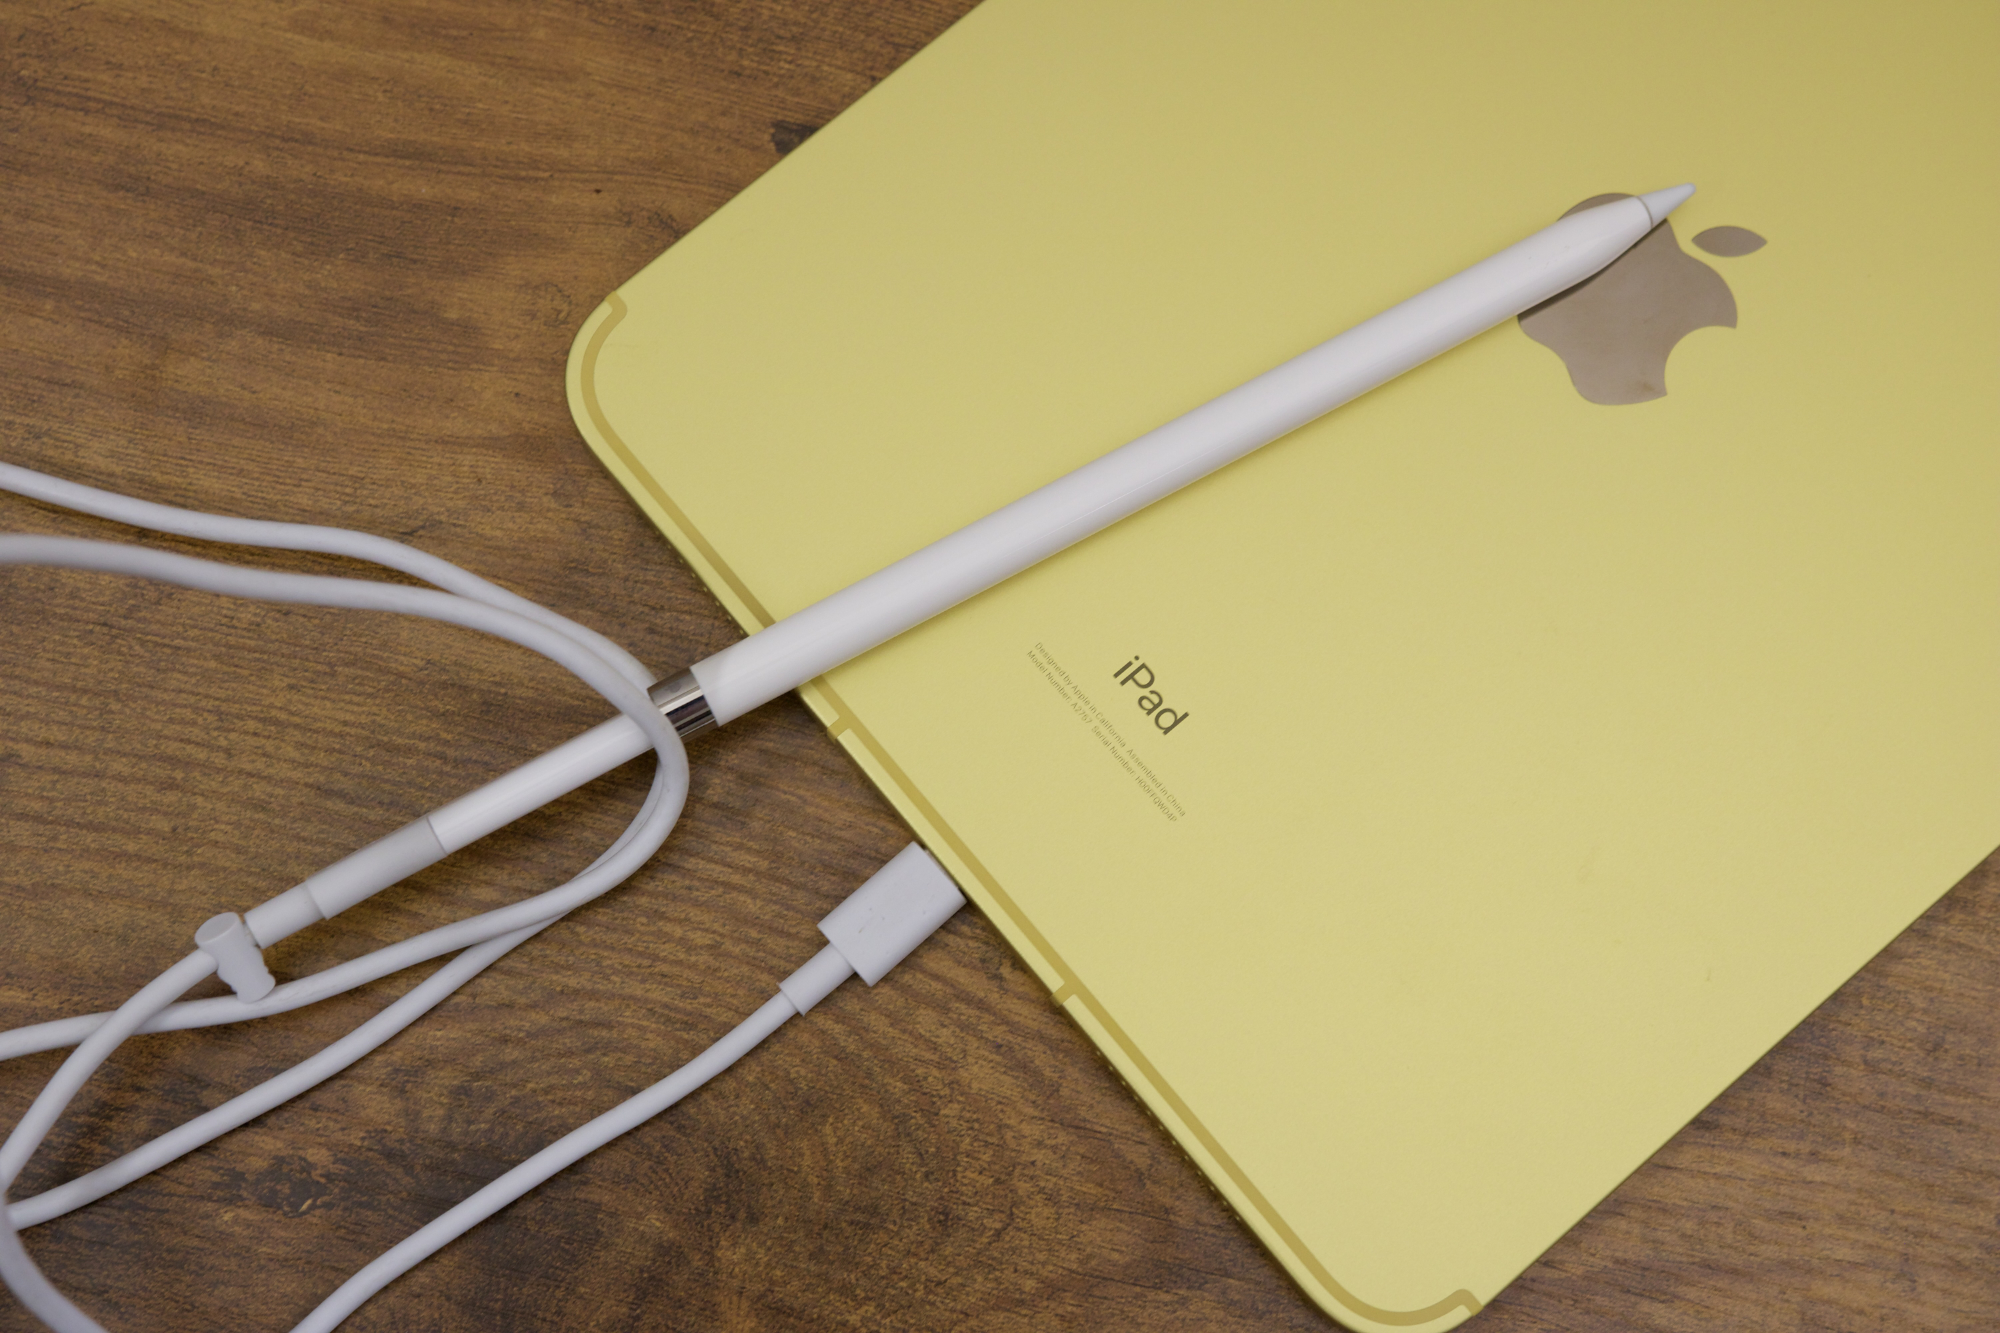 Sell your Apple Pencil (USB-C) online for the most cash